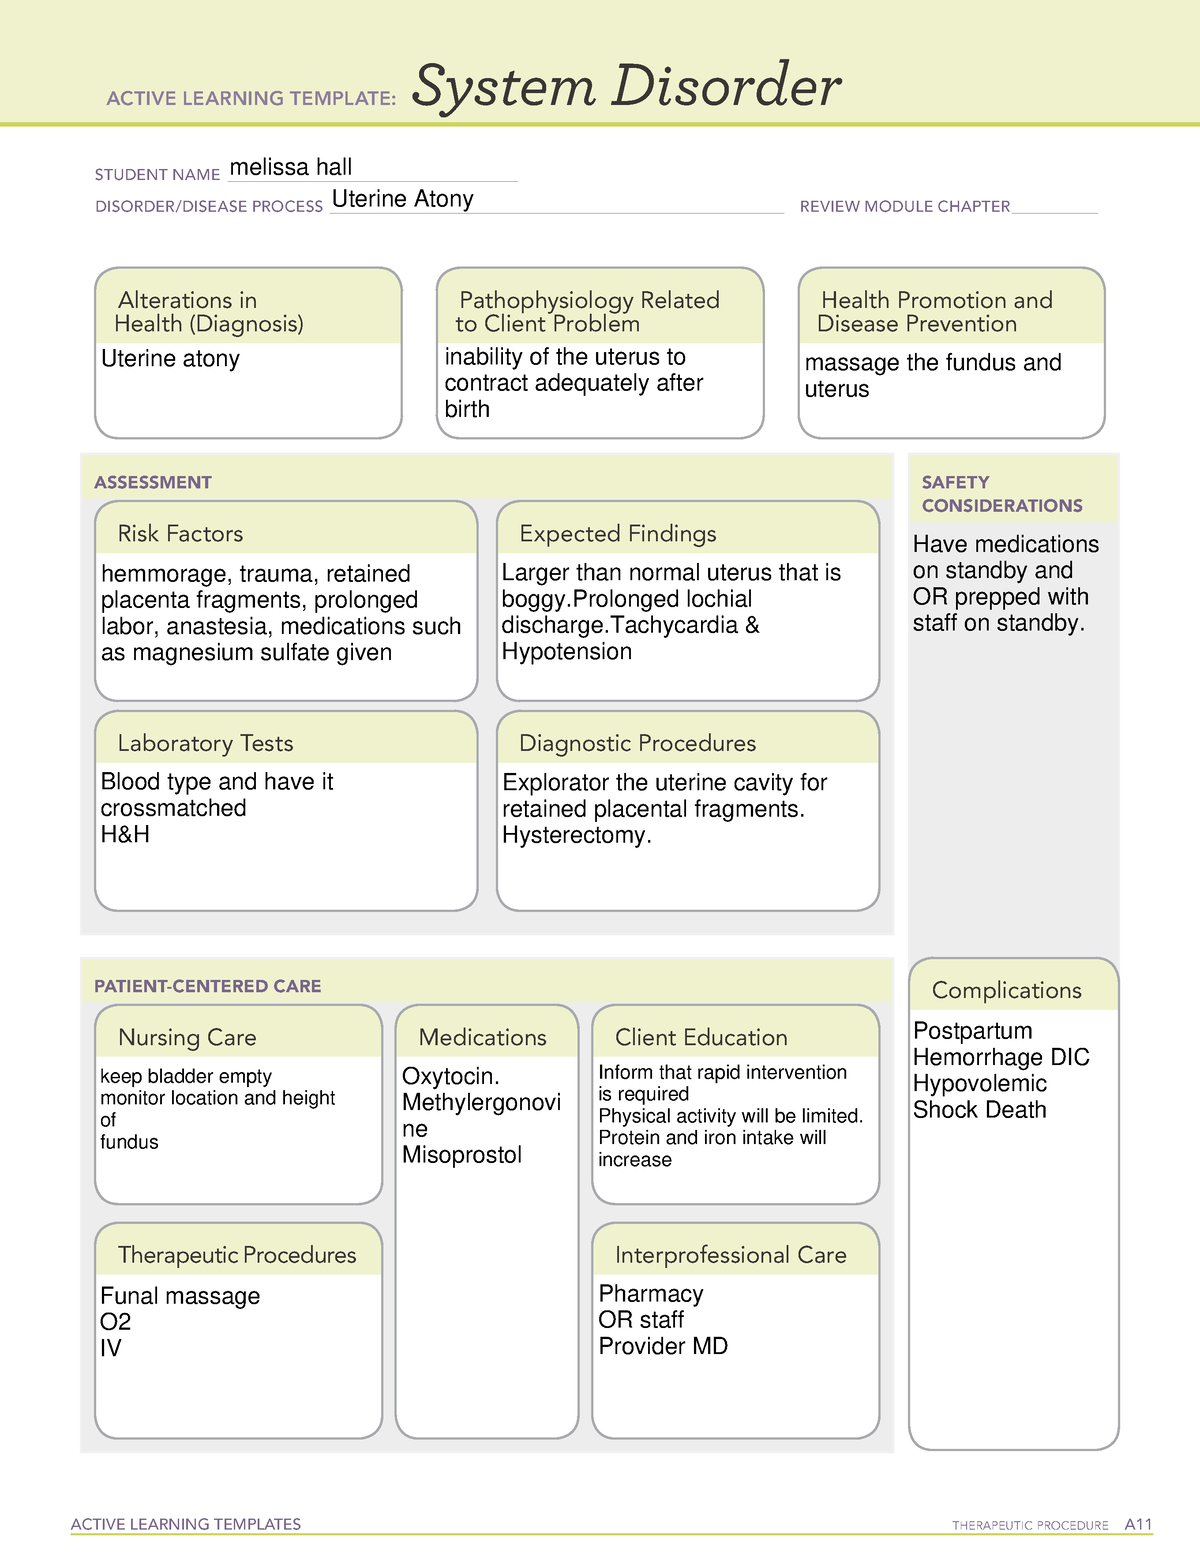 Active Learning Template Uterine Atony - ACTIVE LEARNING TEMPLATES ...